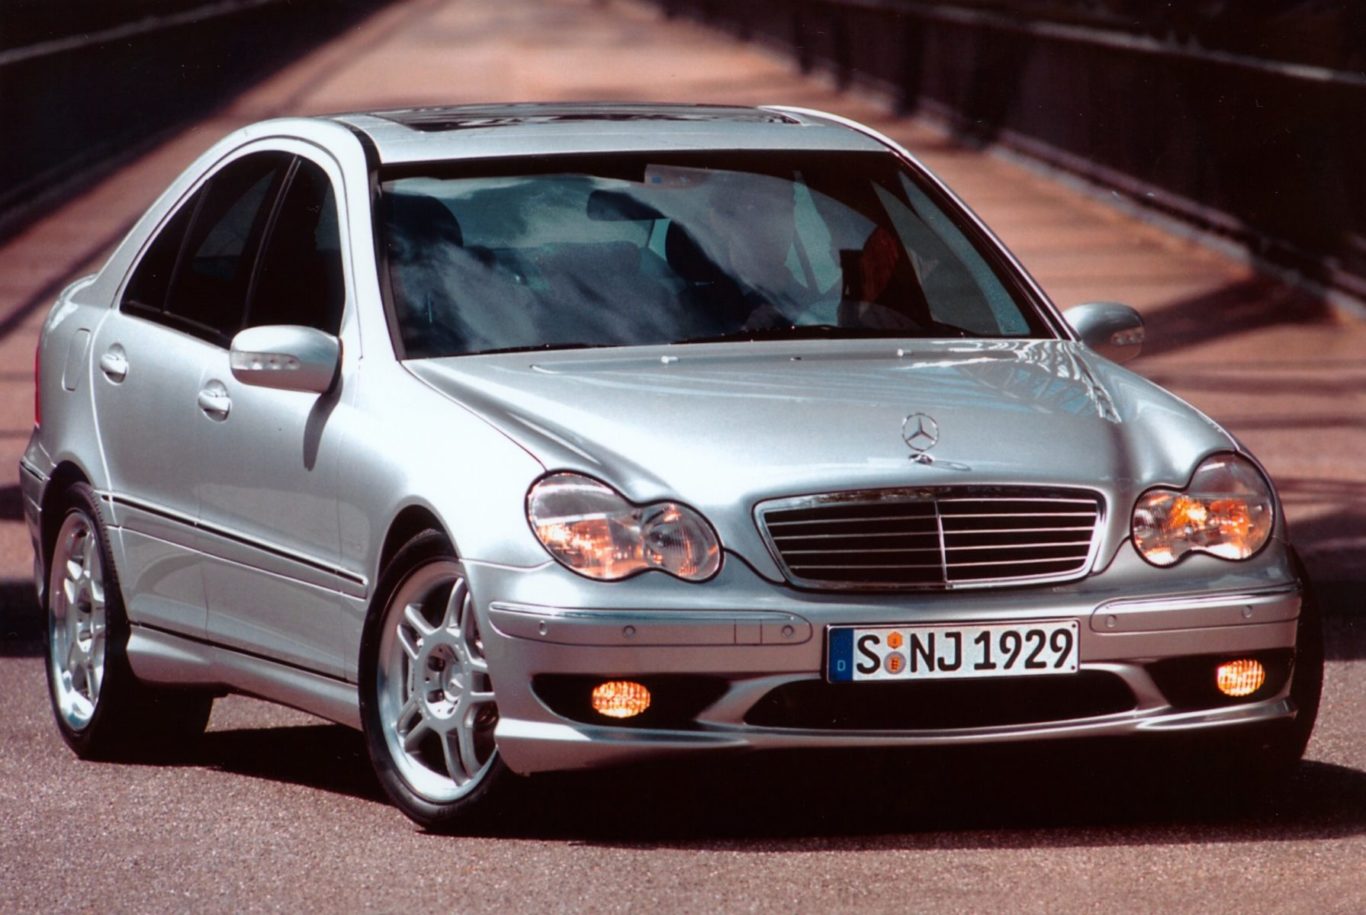 The Mercedes C32 was based on the regular C-Class